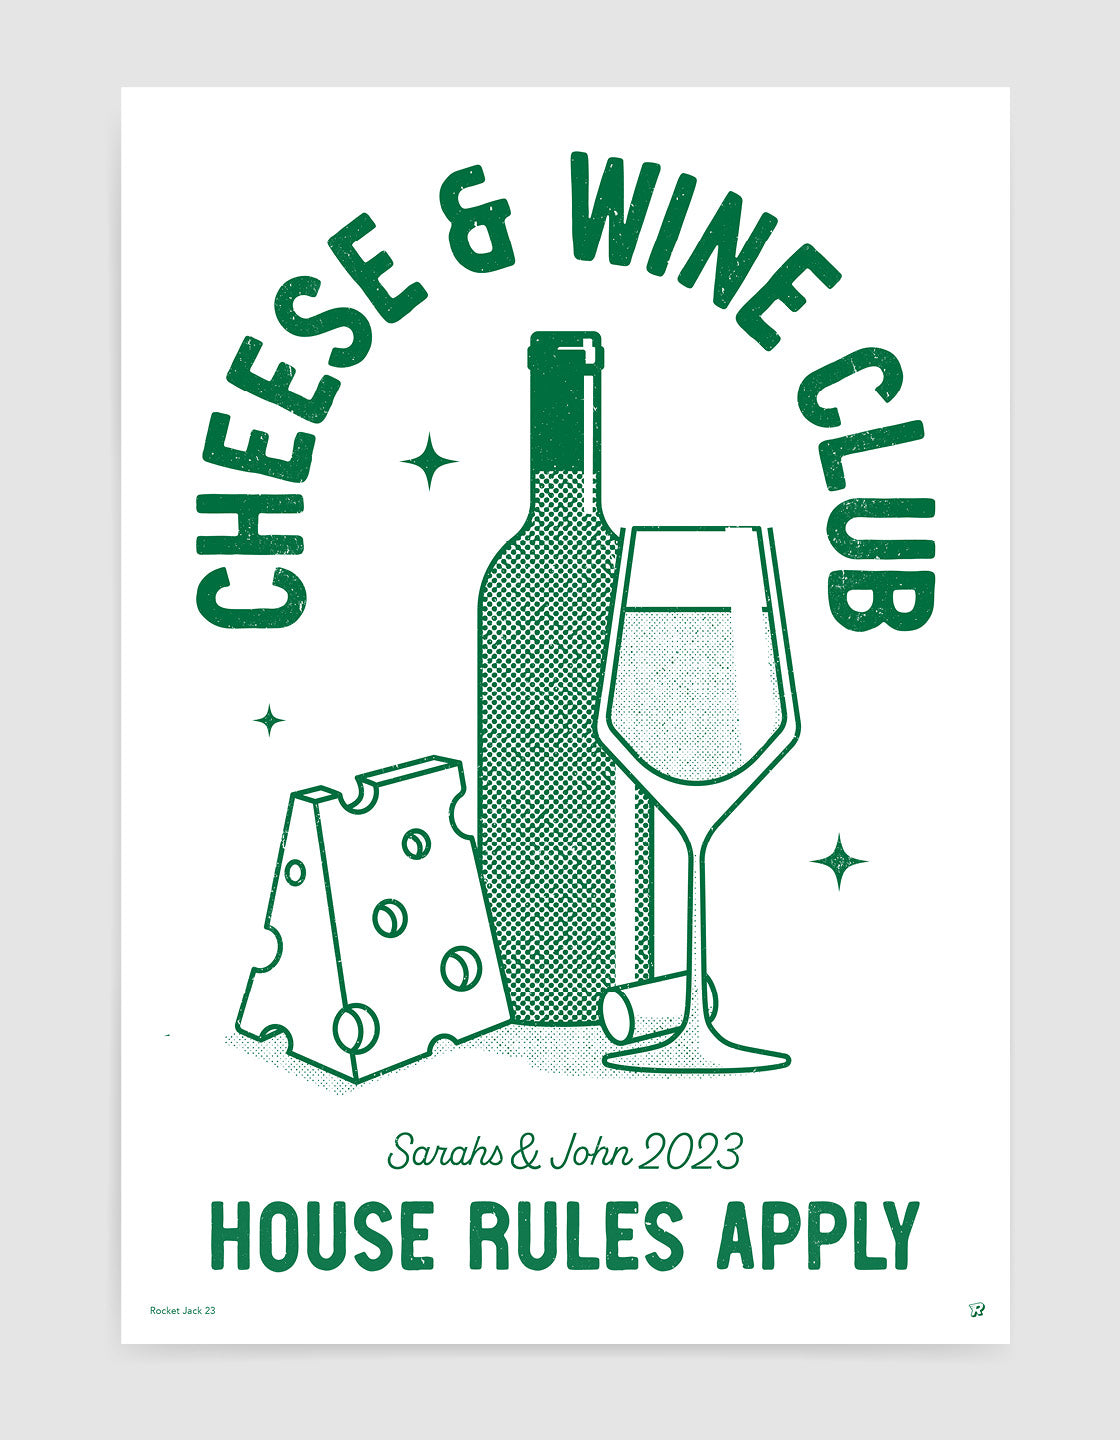 Cheese and wine club - personalised